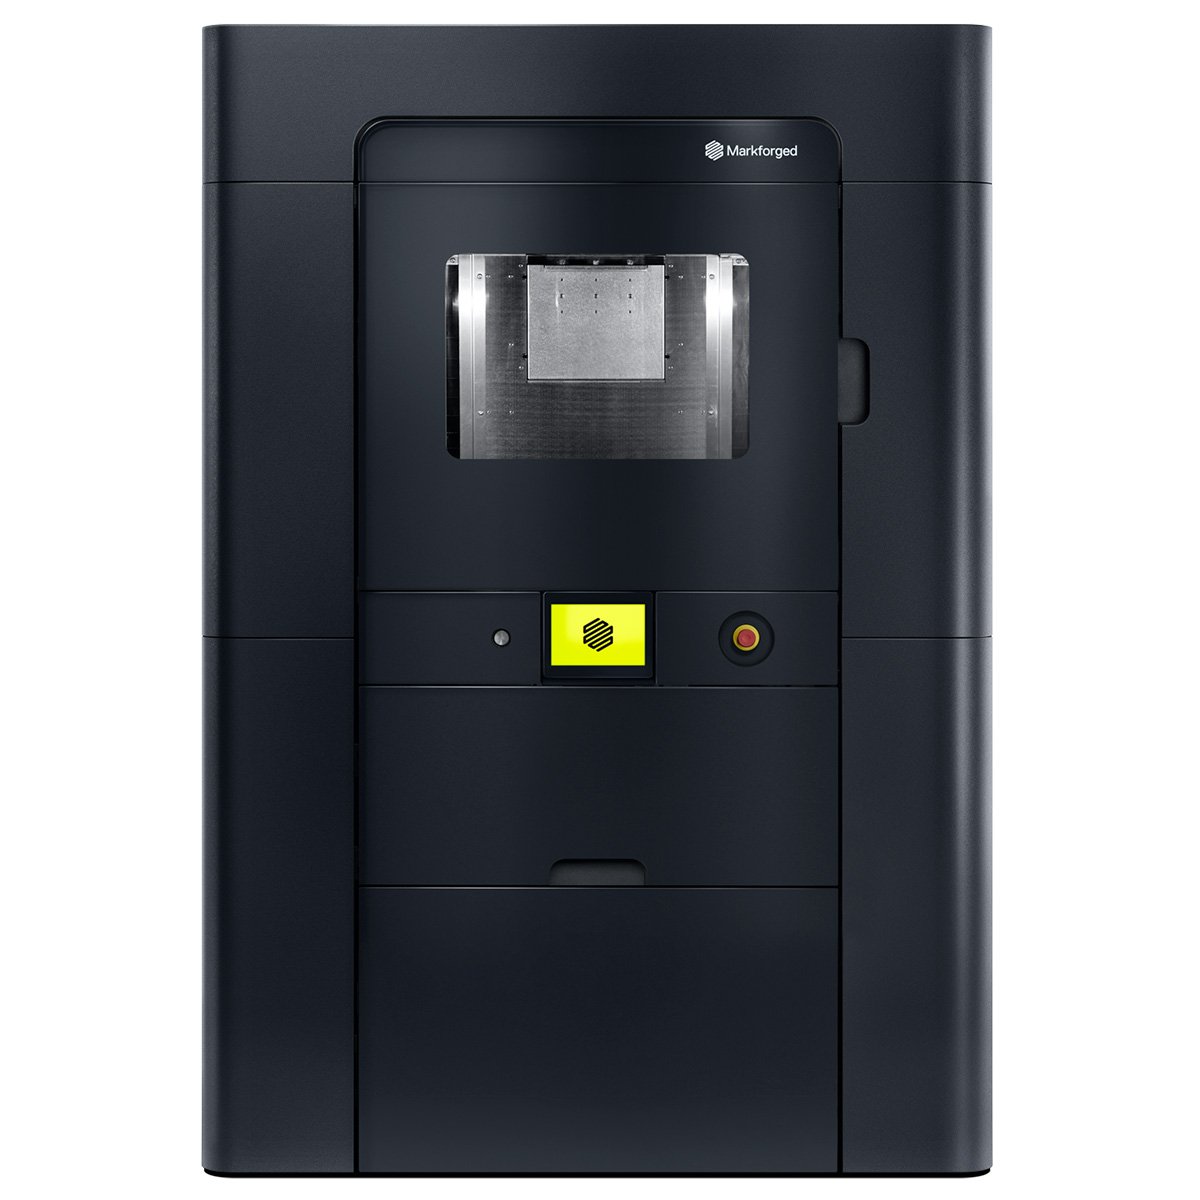 Markforged FX20 product